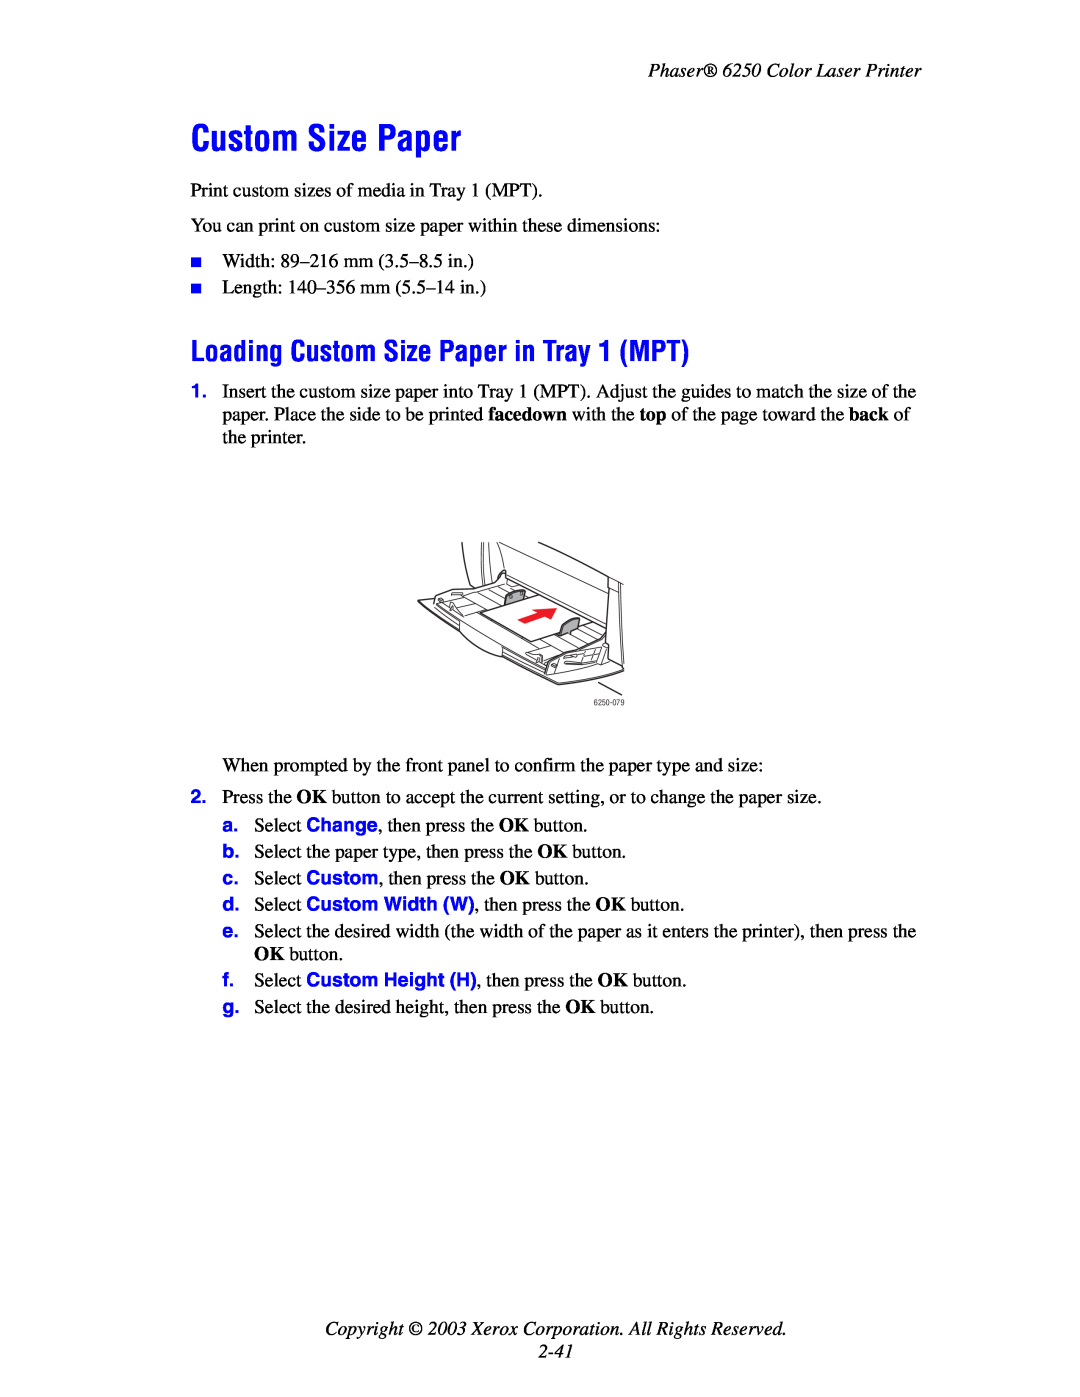 Xerox 6250 manual Loading Custom Size Paper in Tray 1 MPT, Copyright 2003 Xerox Corporation. All Rights Reserved 2-41 